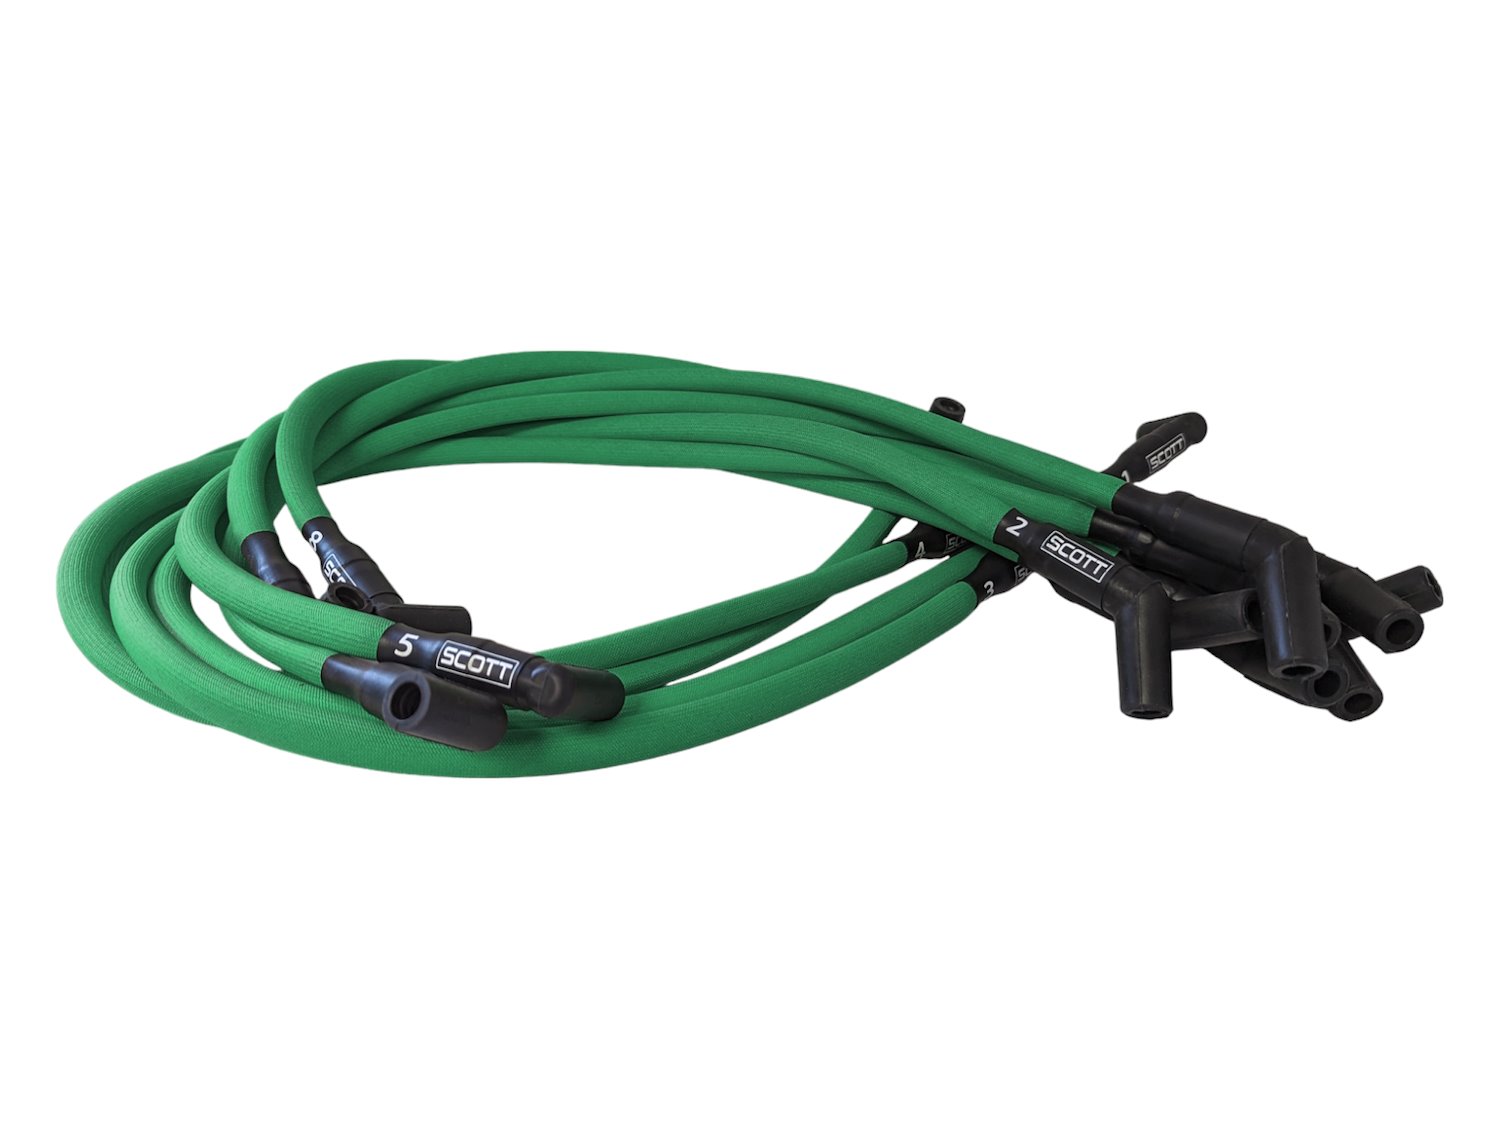 SPW-PS-439-4 High-Performance Fiberglass-Oversleeved Spark Plug Wire Set for Small Block Ford, Under Header [Green]